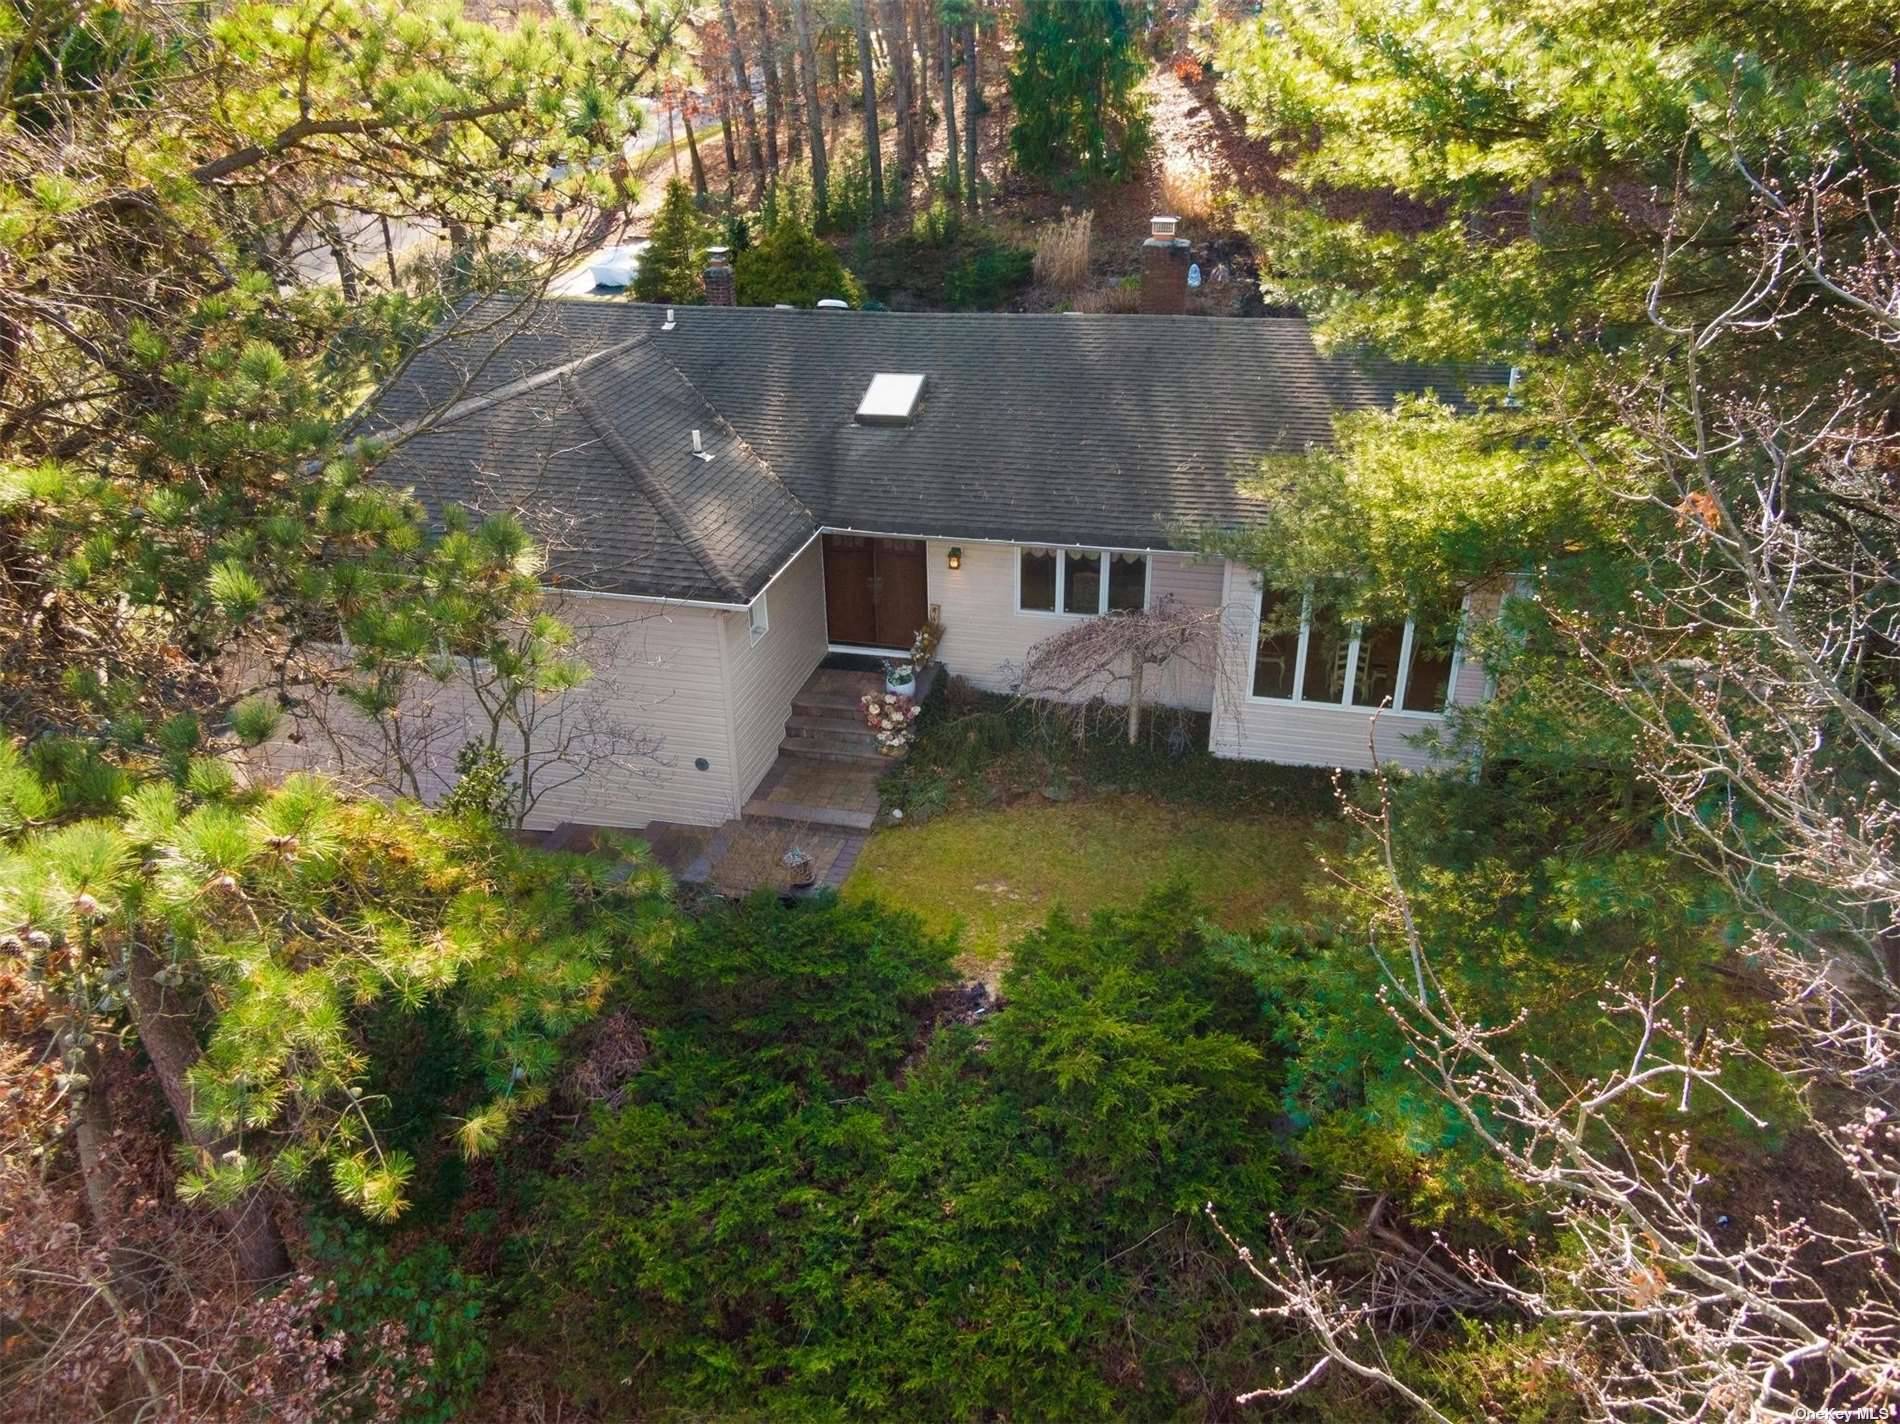 Treat yourself to a life of sophistication introducing a rare gem in the Wichard Woods area, this luxury home sets the stage for unparalleled living within the acclaimed Commack school ...